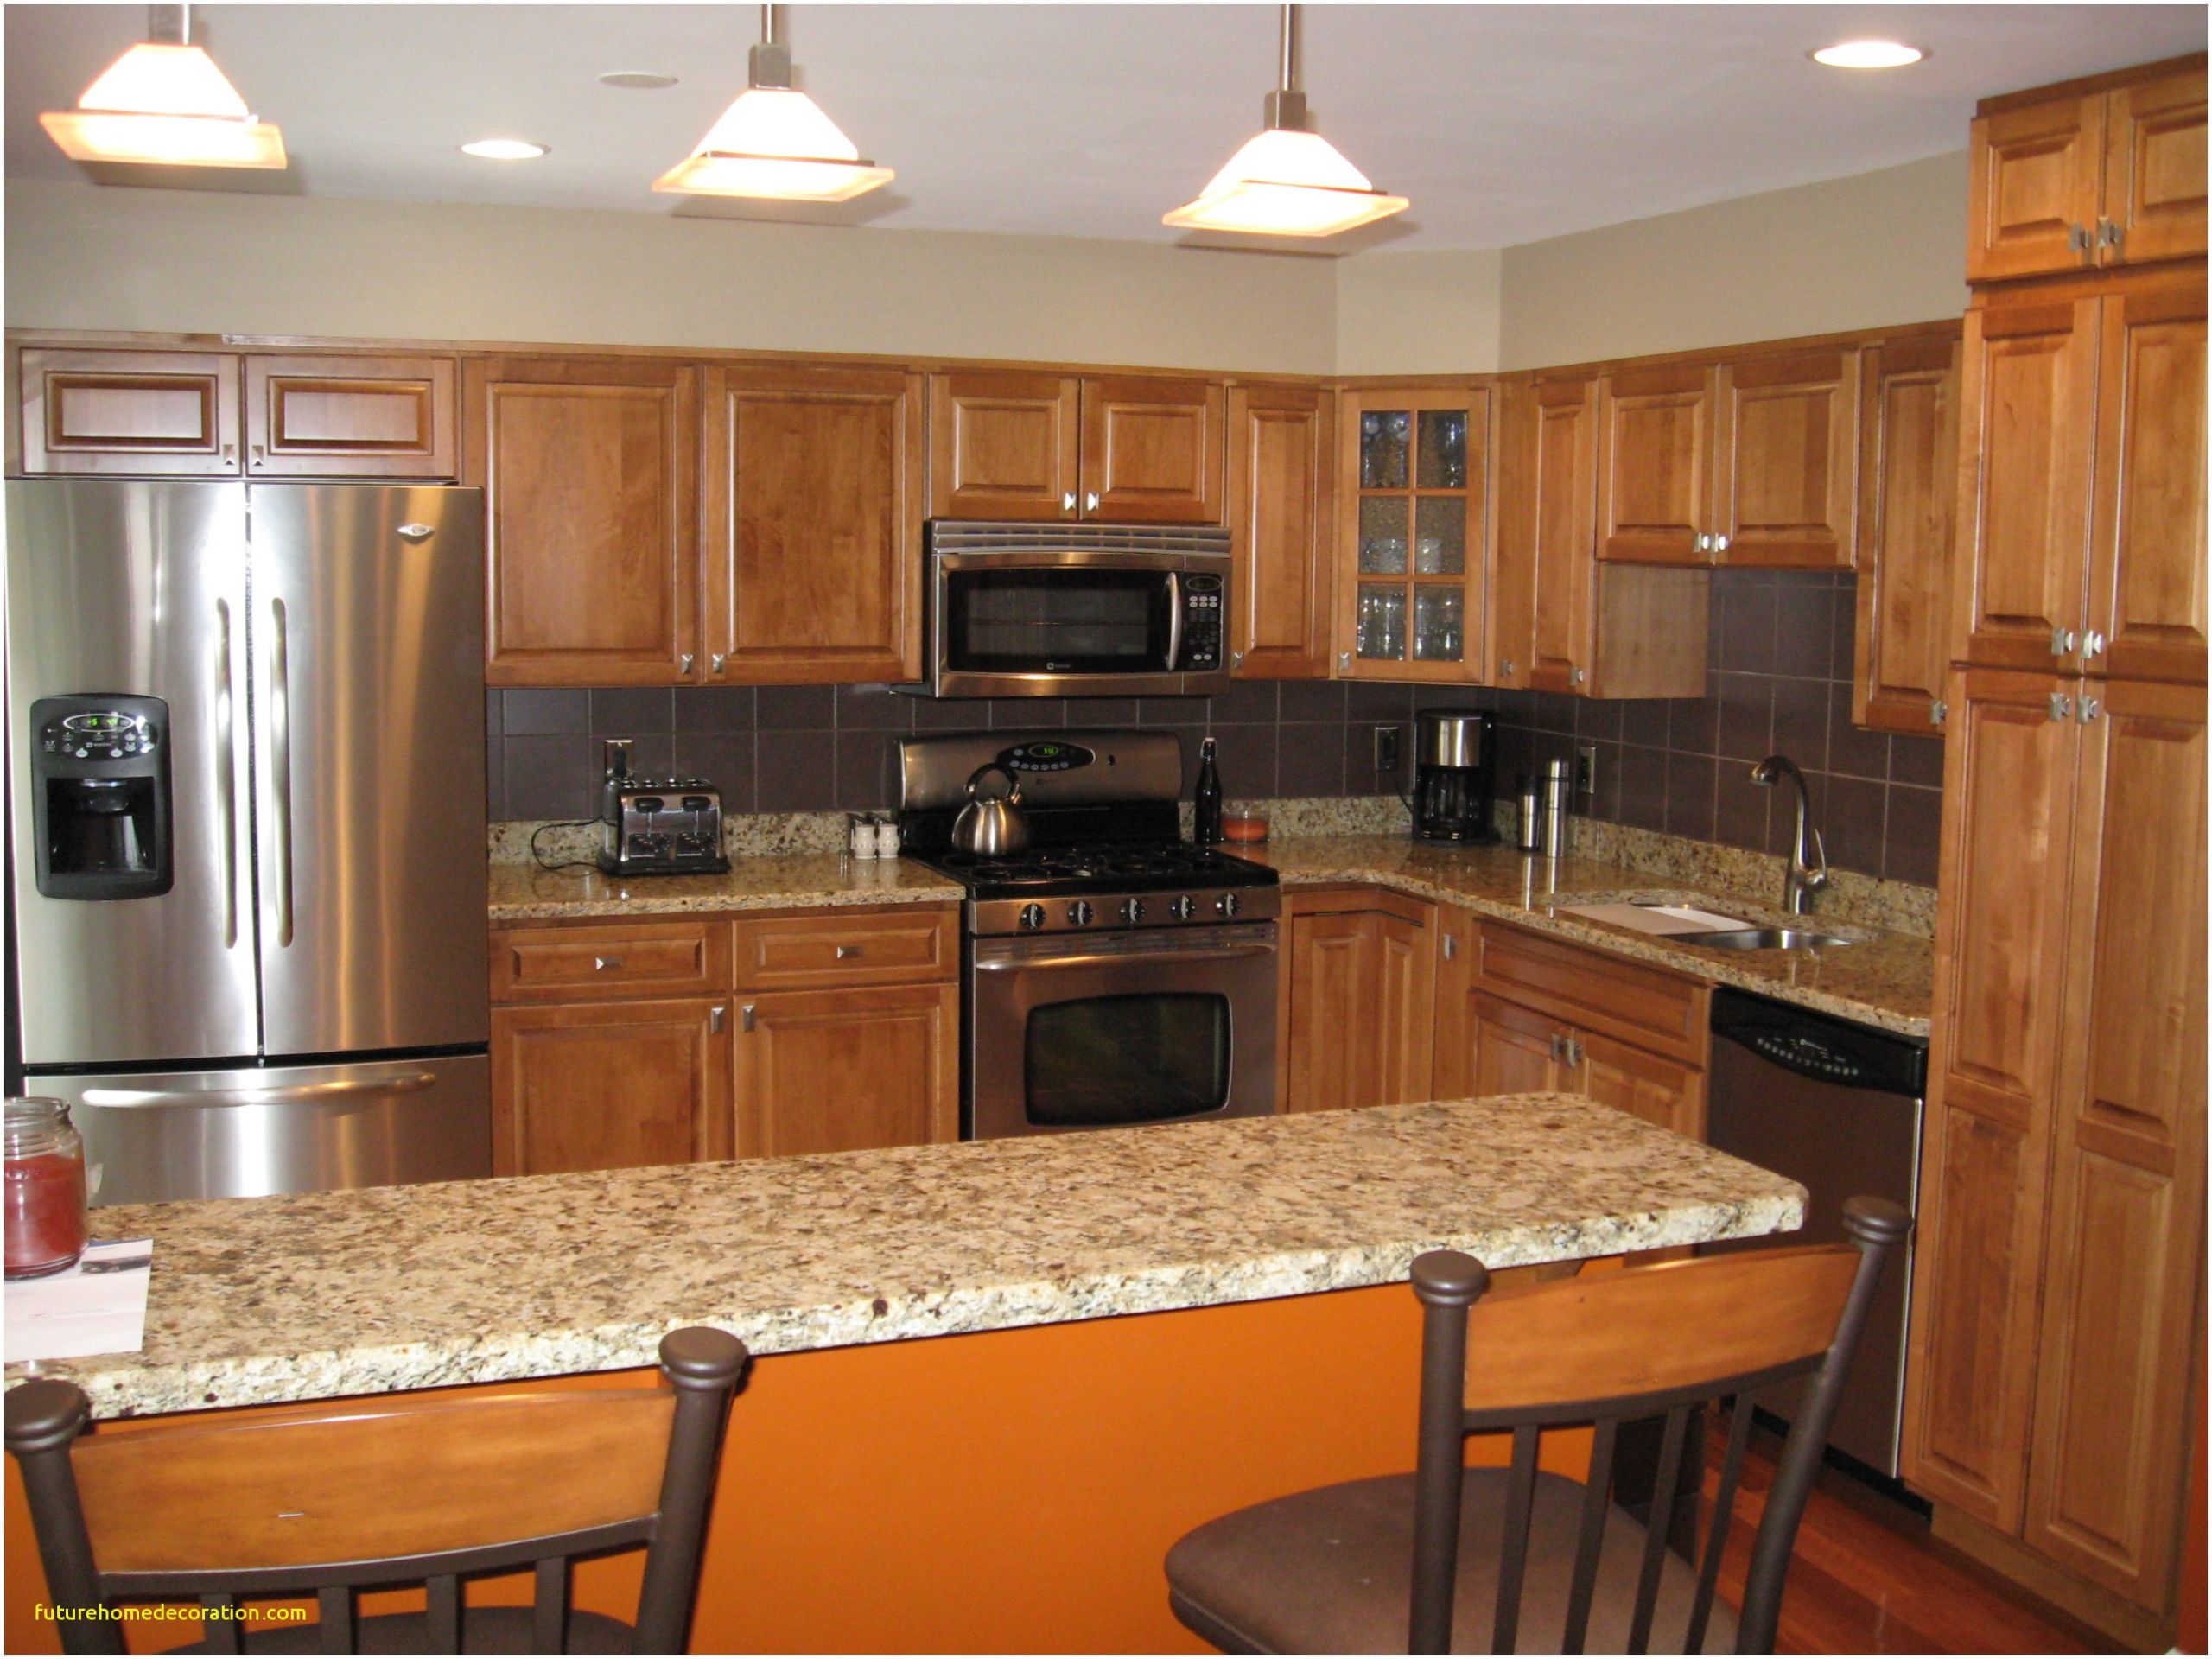 Kitchen Remodels For Small Kitchens
 Luxury Small Kitchen Remodel Ideas